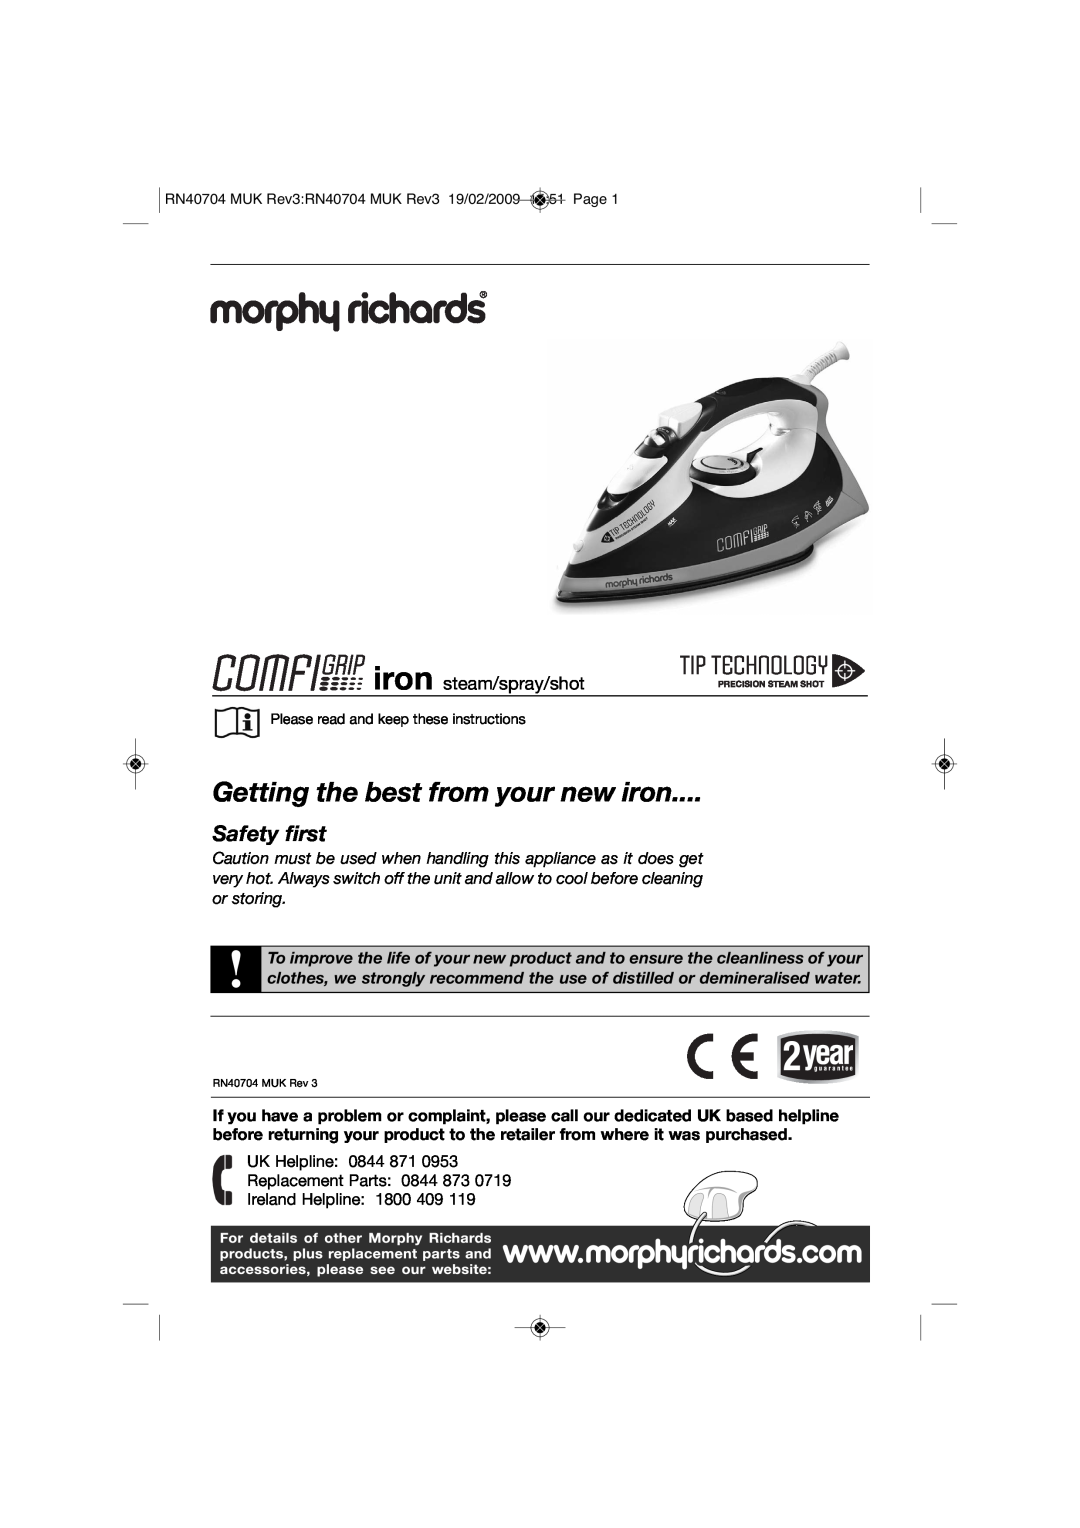 Morphy Richards 40734 manual Getting the best from your new iron, Safety first, iron steam/spray/shot 